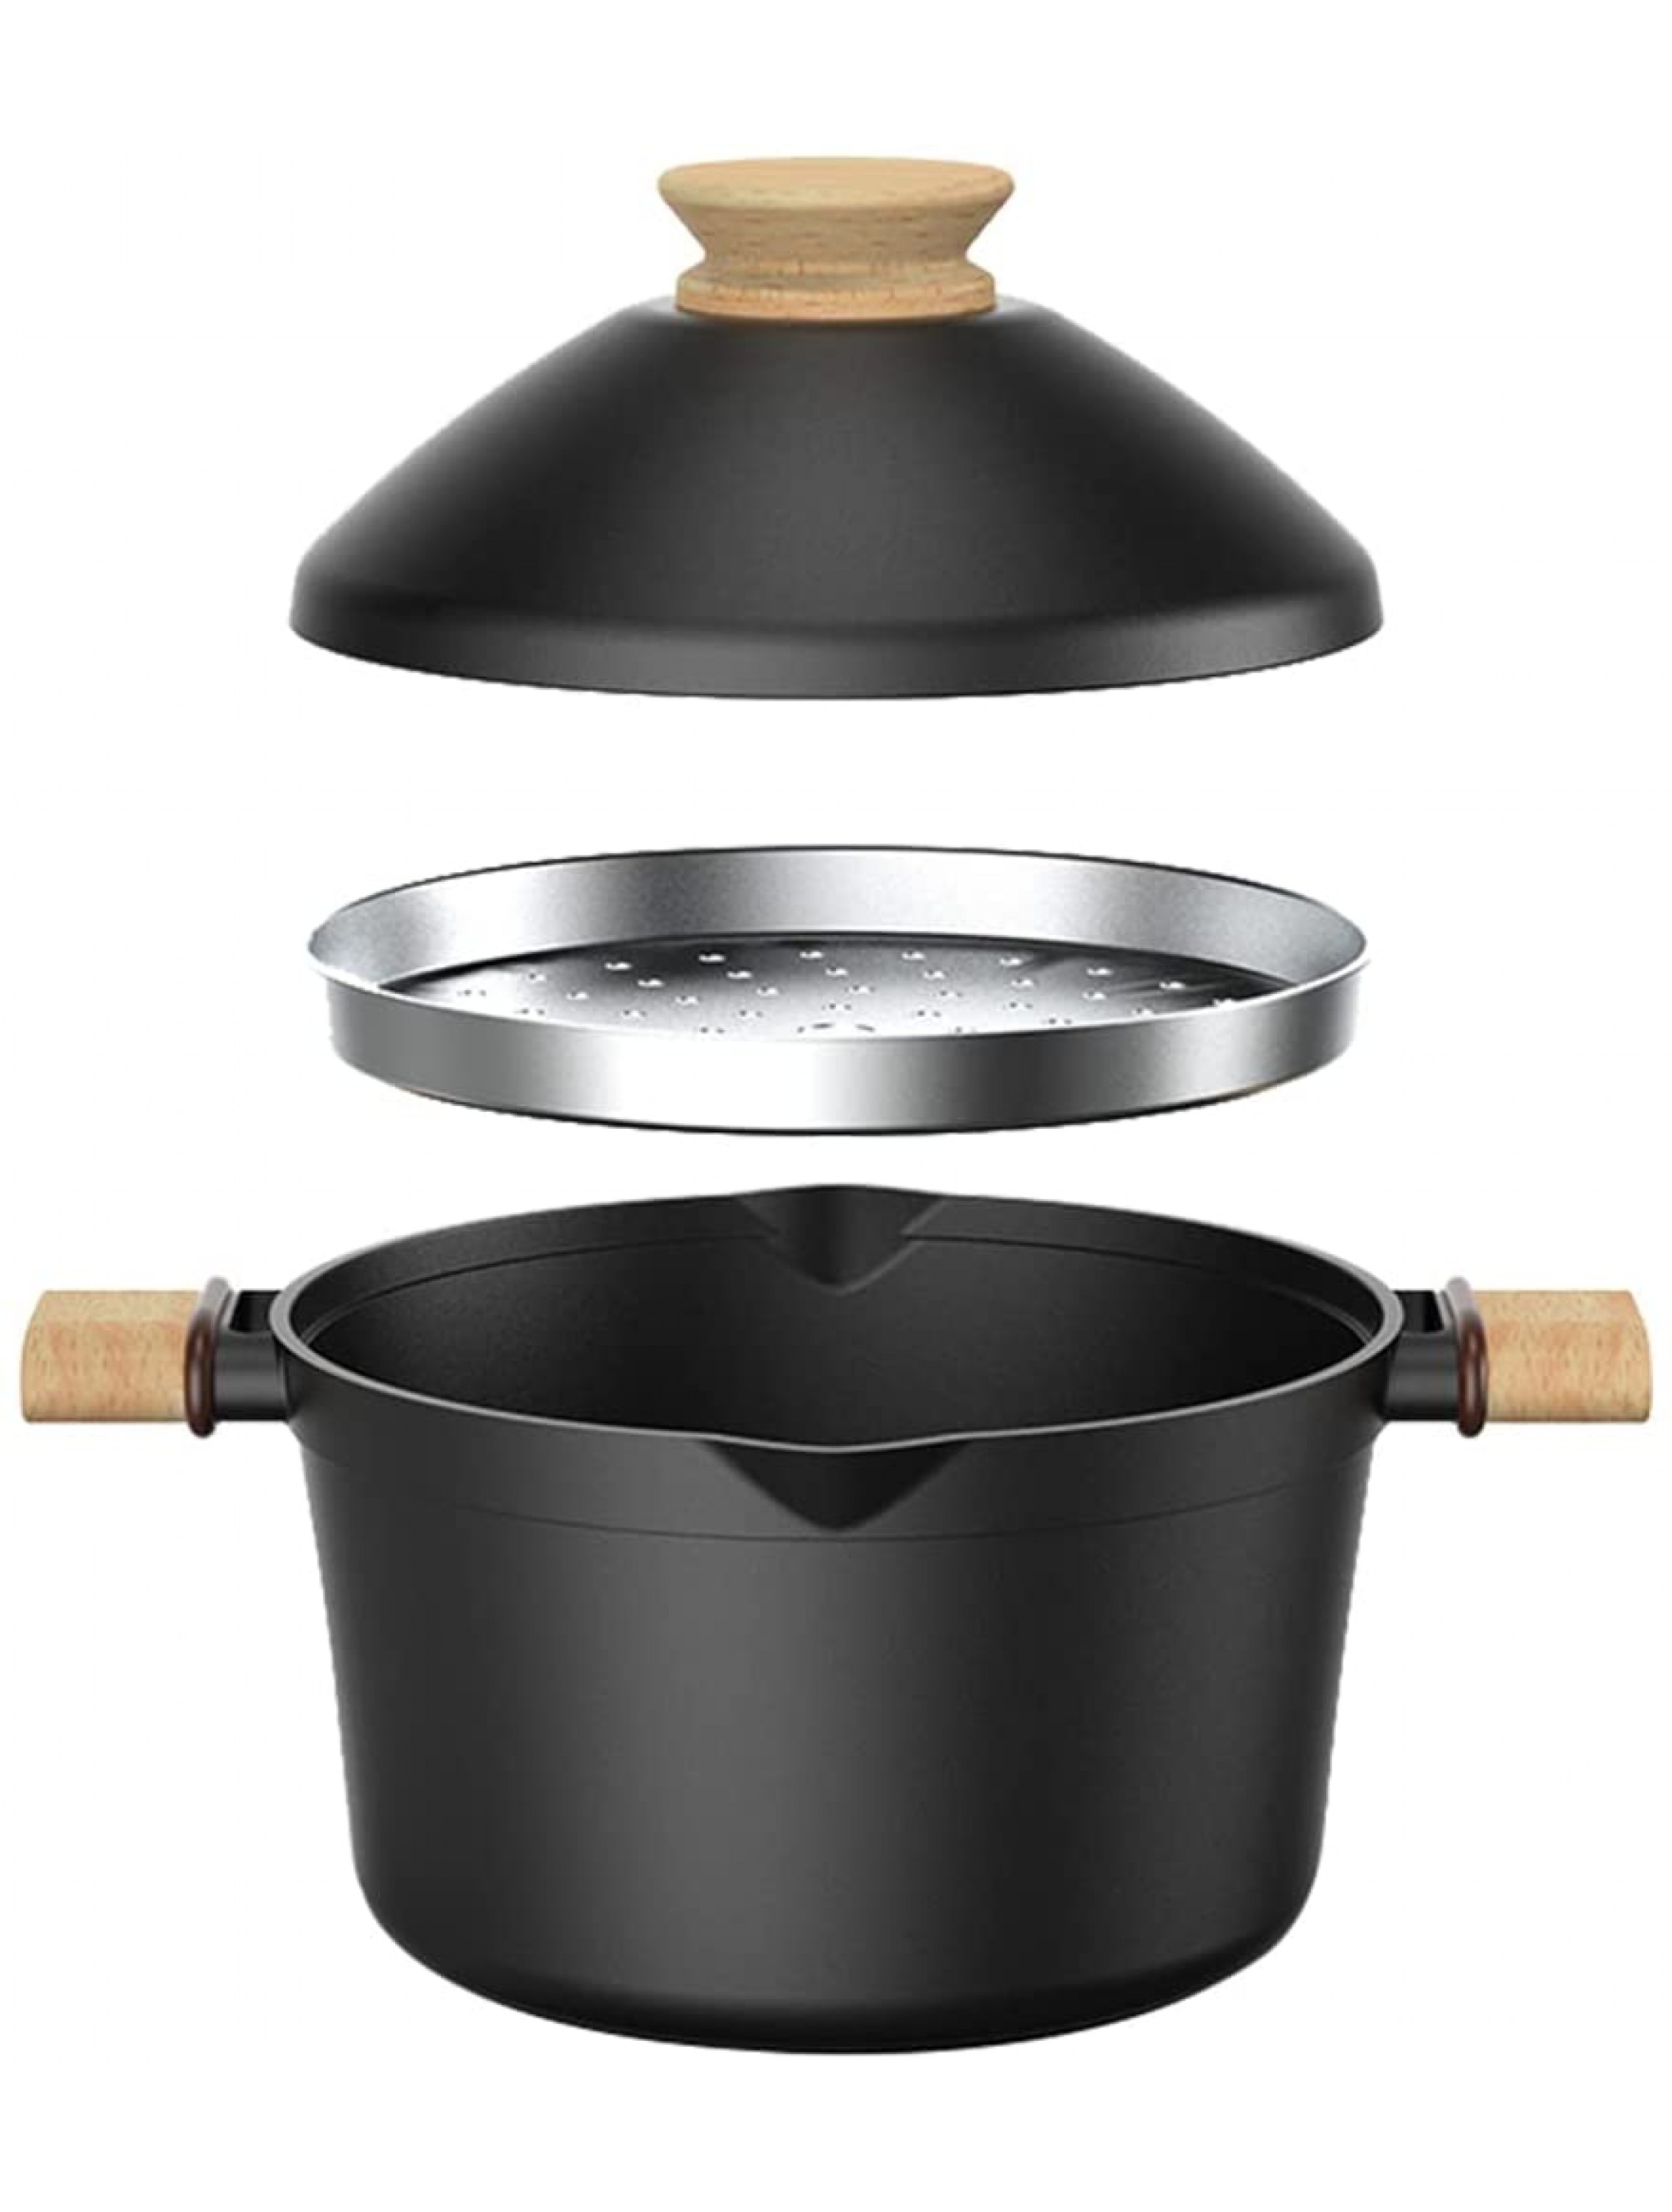 Stock Pot with Lid,Taste plus Nonstick Aluminum Small Soup Pot with Wooden Dual Handles and Steamer Inser 4QT Black - BETF7LC6H